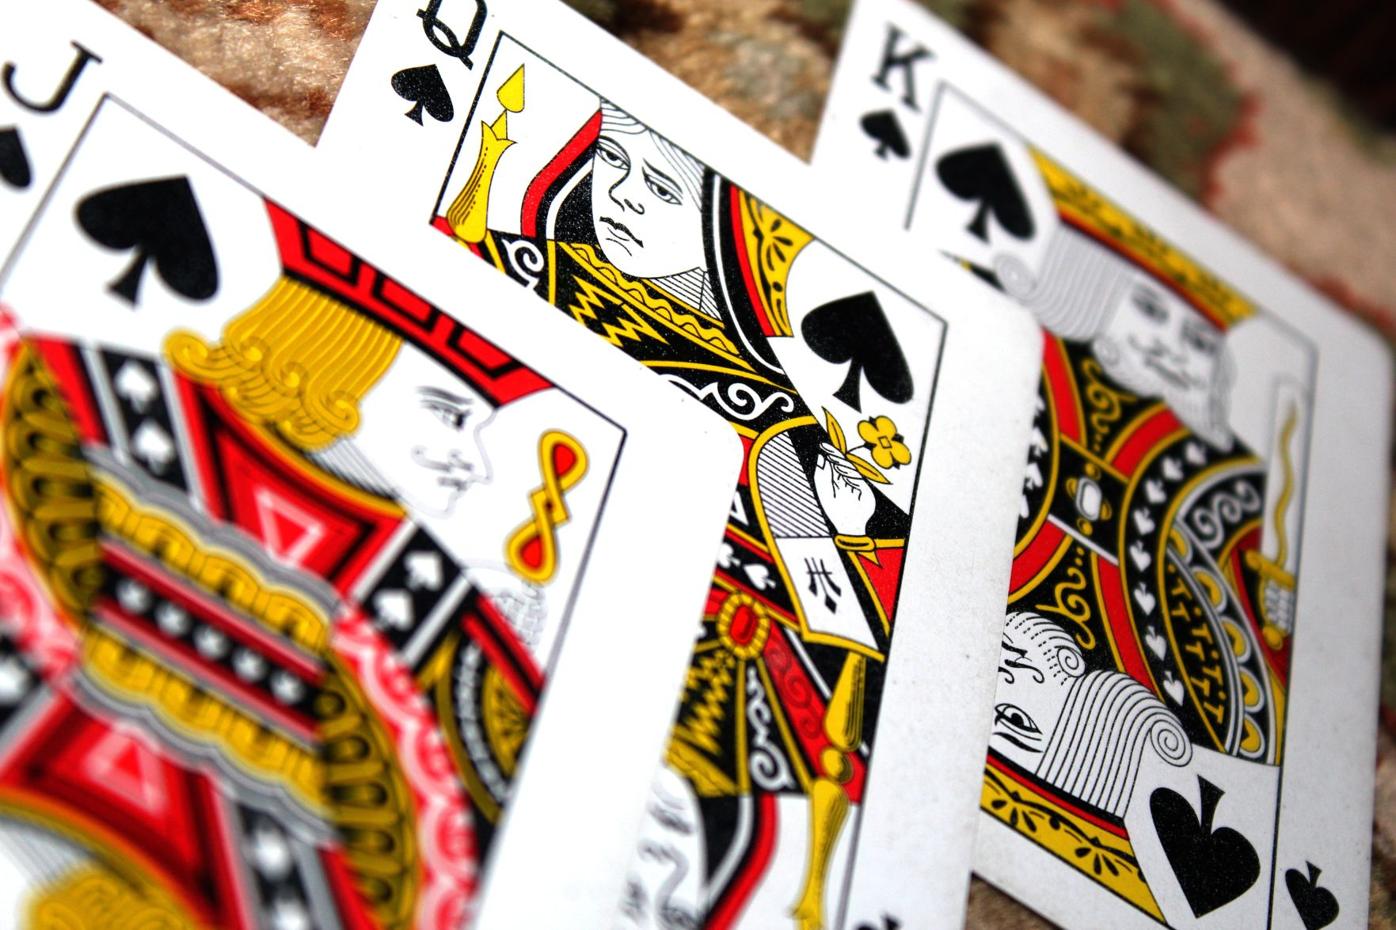 5 Reasons Why Playing online card games is good for you - VIP Spades